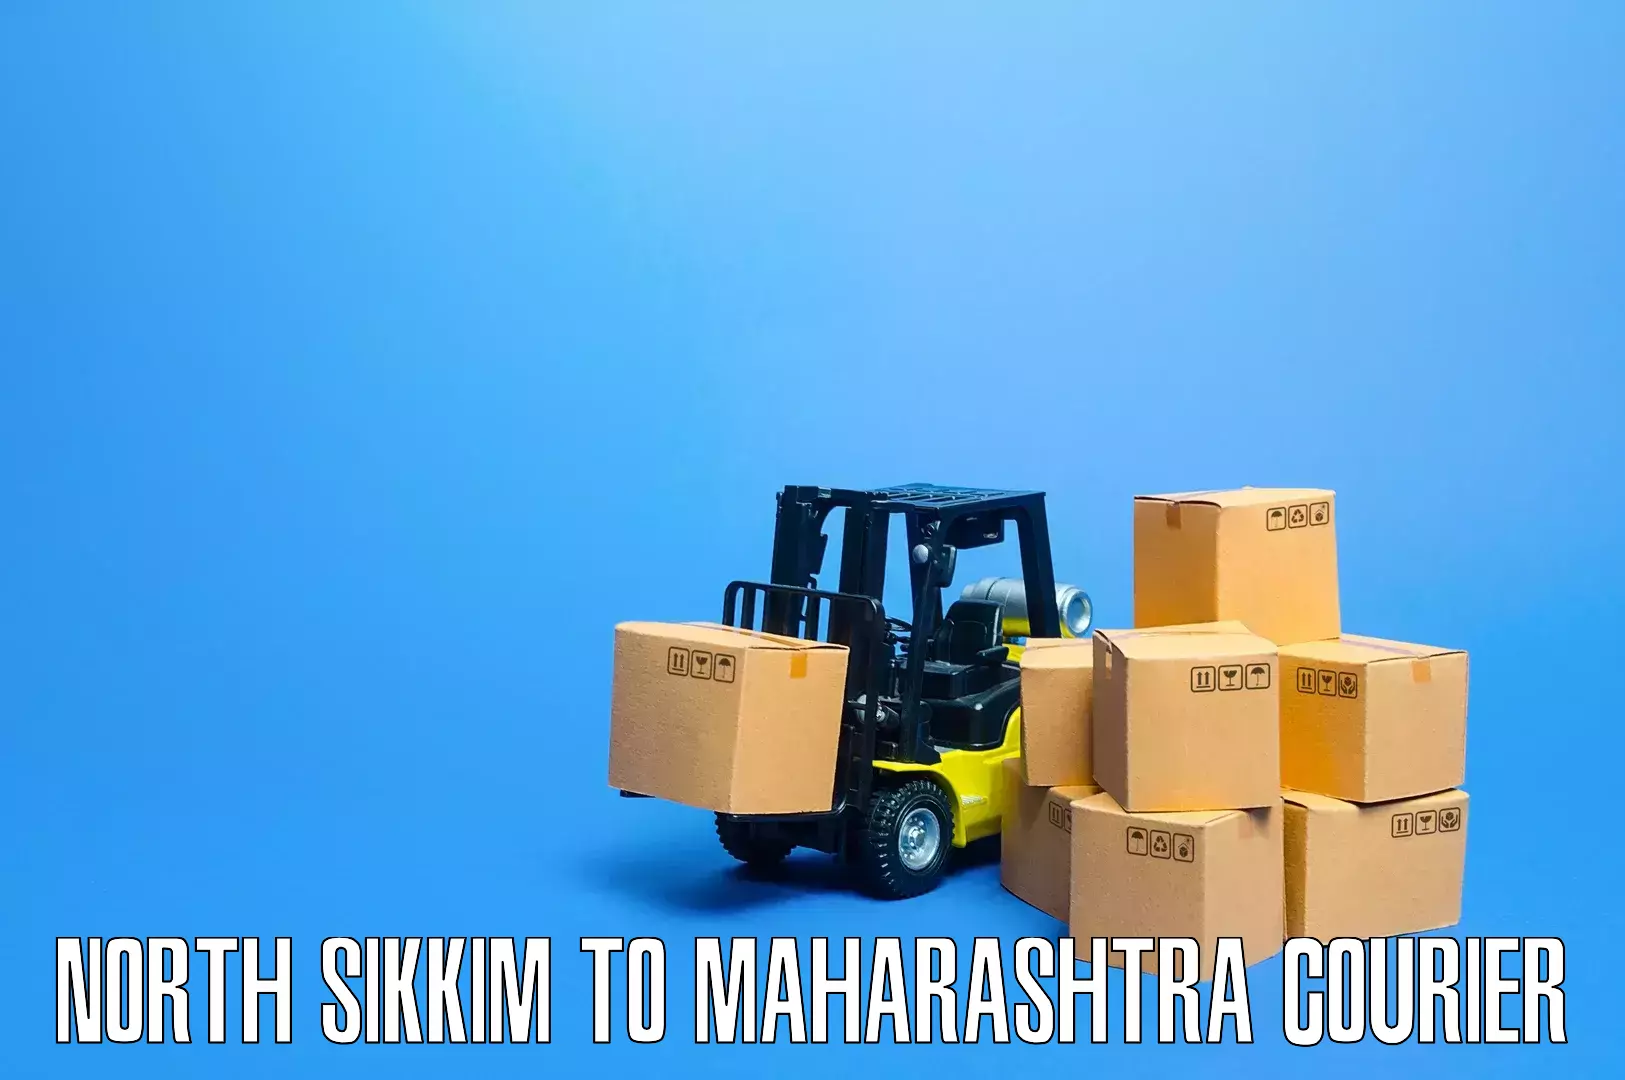 Household transport solutions North Sikkim to Maharashtra